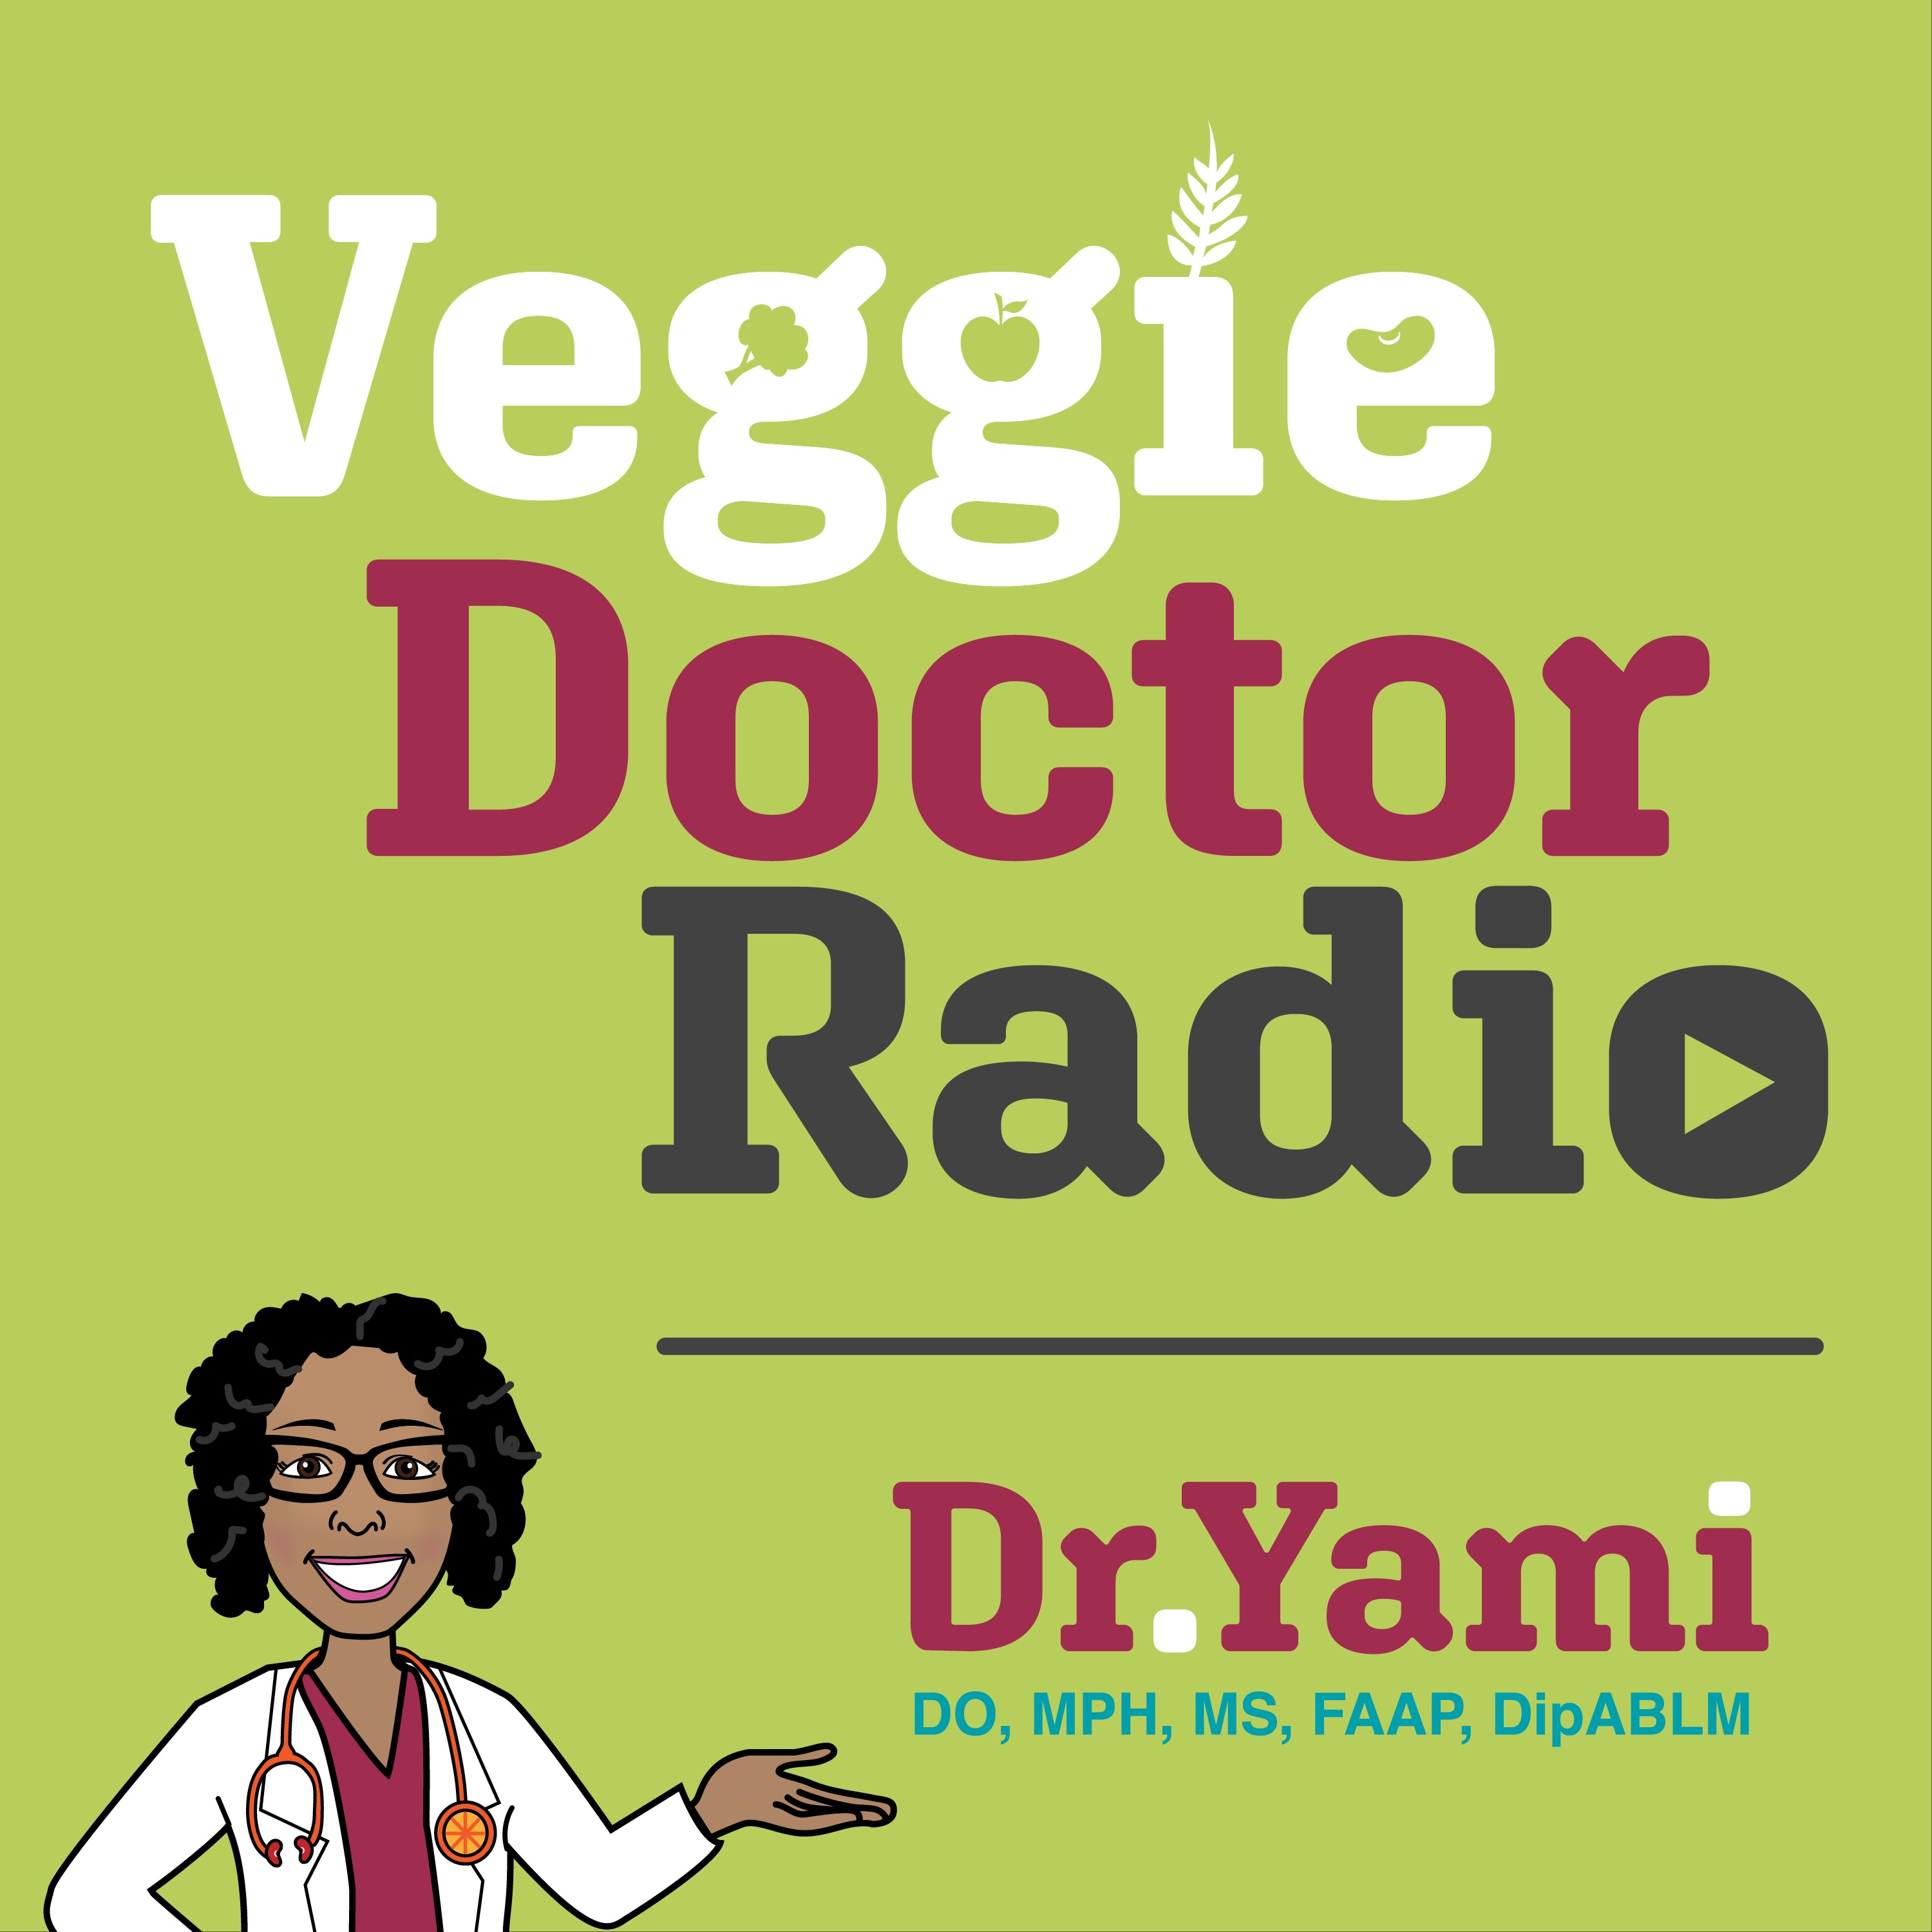 148B: How This Songwriter is Using Her Music to Change the World (Veggie Doctor Radio)